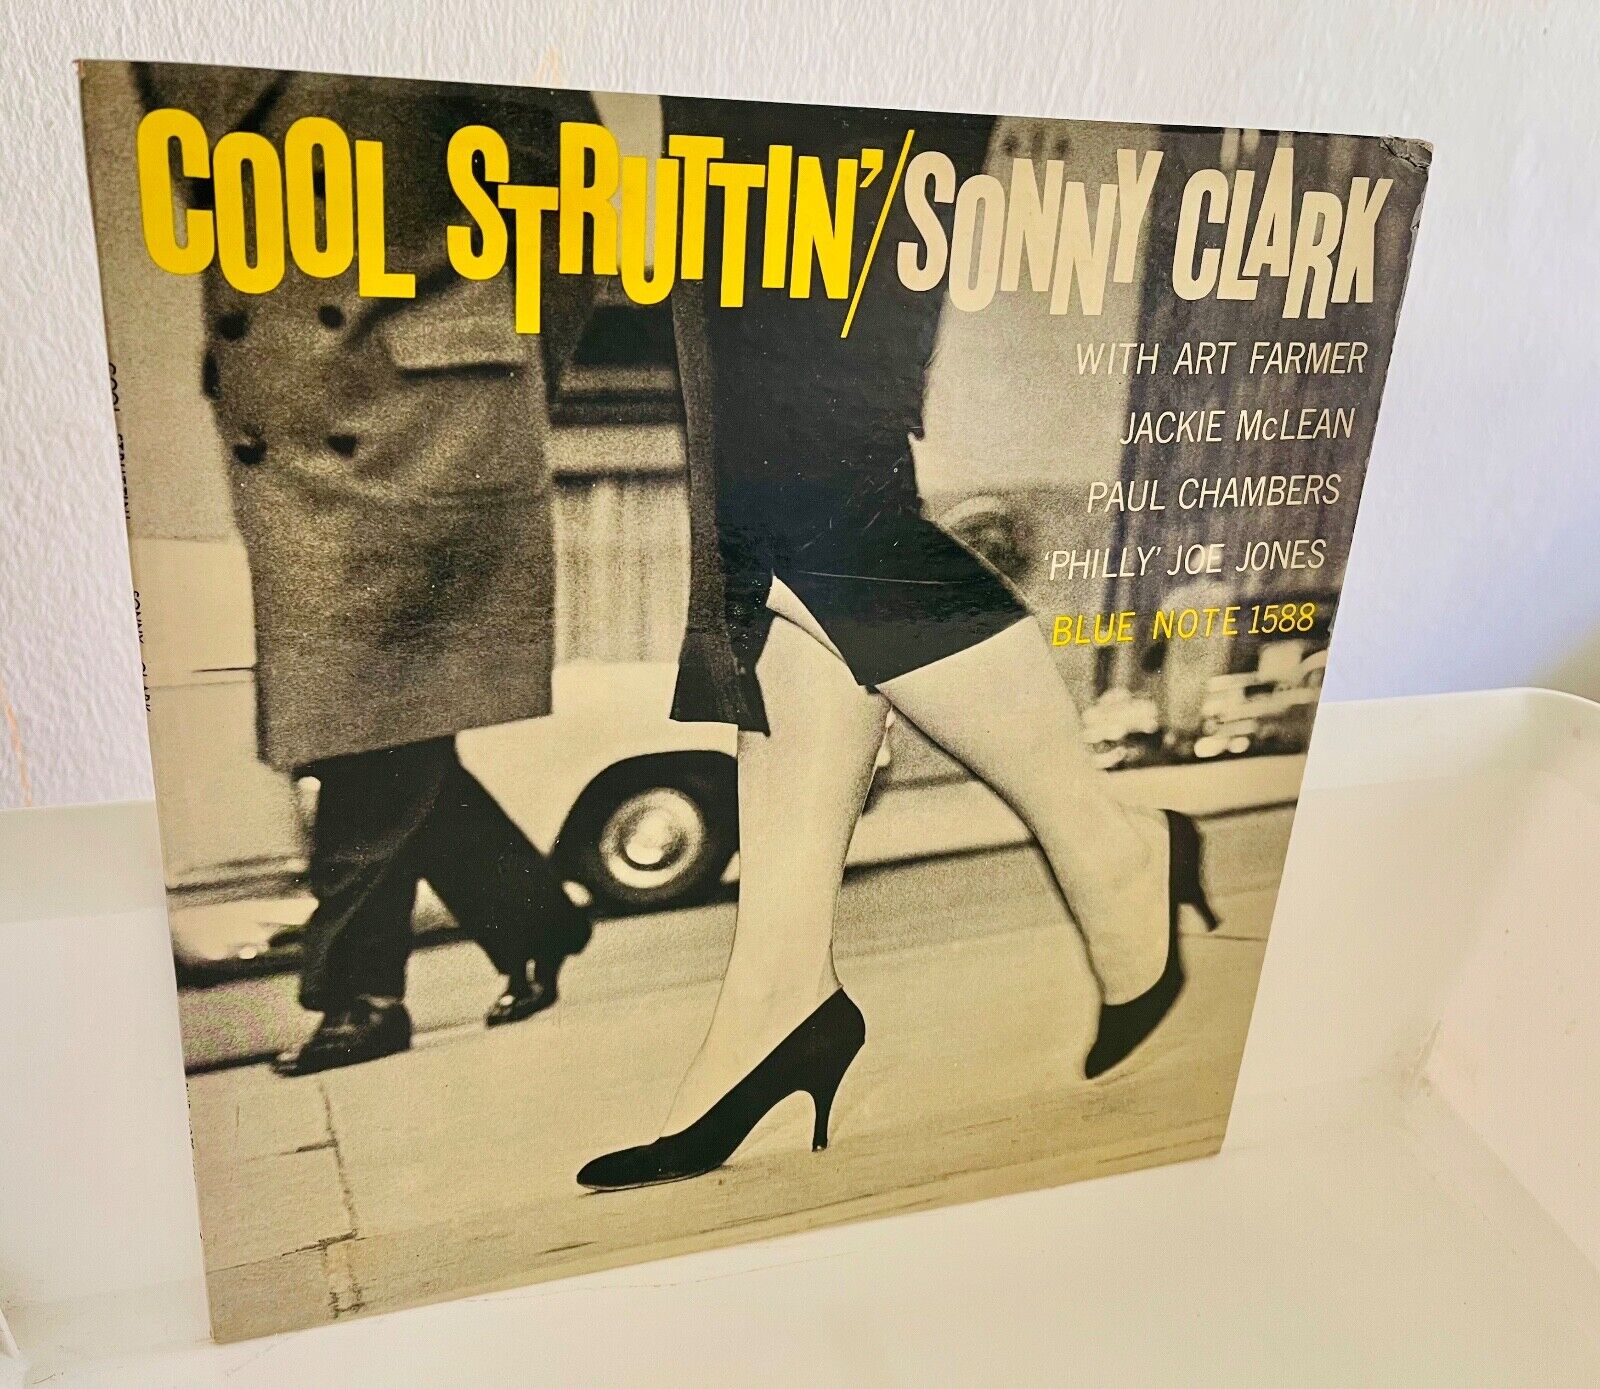 SONNY CLARK - COOL STRUTTIN - BLUE NOTE - FIRST MONO EDITION EAR -LITTLE PLAYED